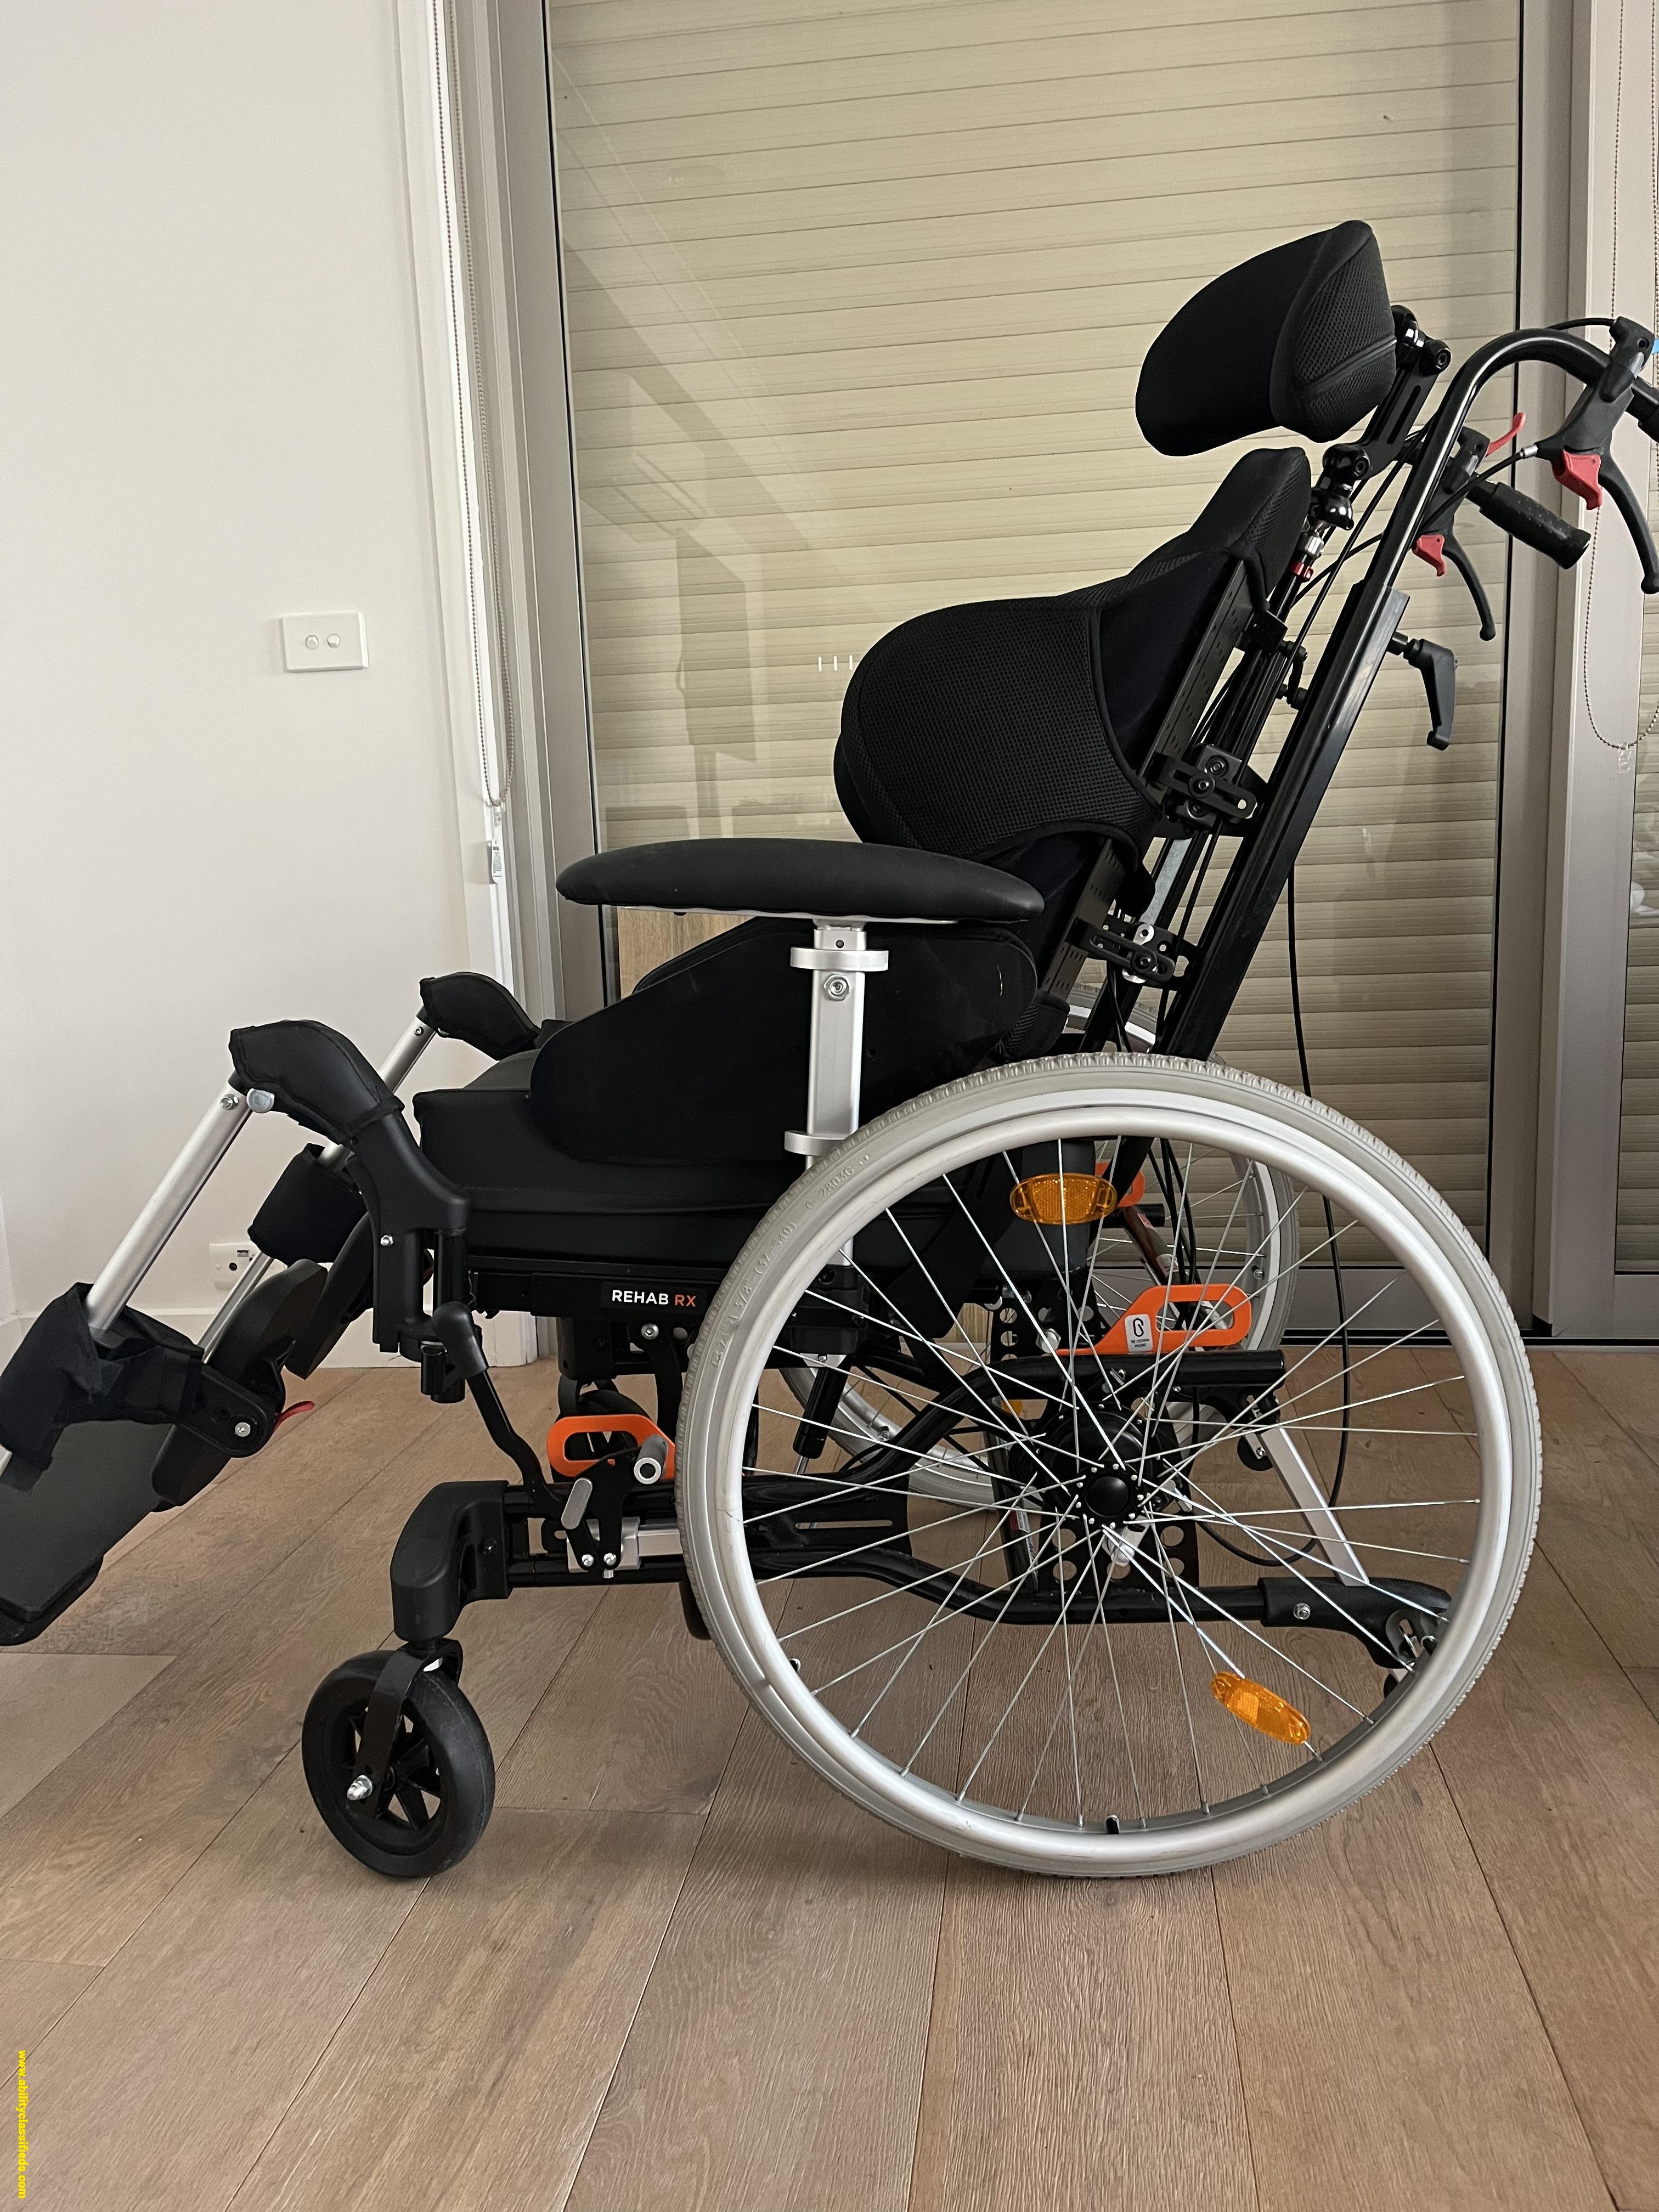 Aspire Rehab RX Tilt in Space manual wheelchair (20x20) with elevating leg rests Spex Mantaray backrest & mounting hardware